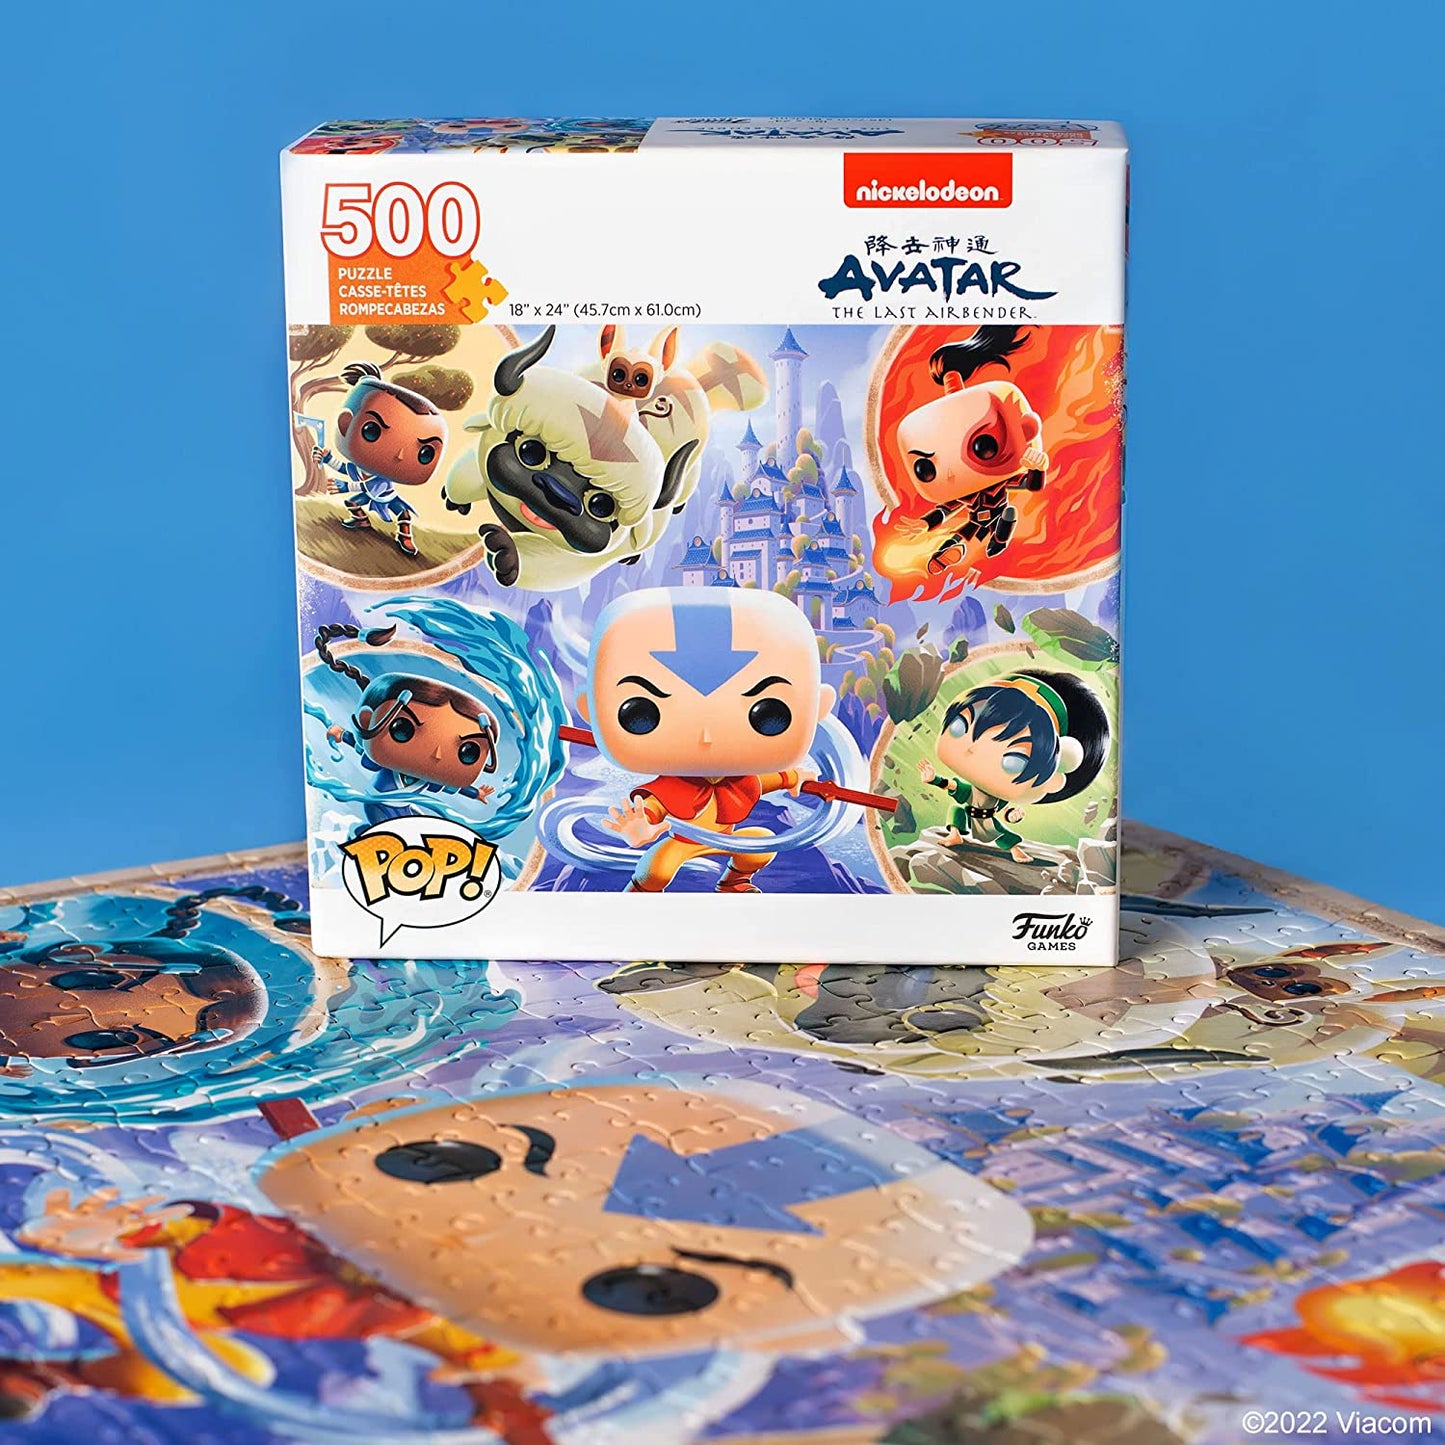 Pop! Puzzles - Avatar The Last Airbender - 500 Piece Jigsaw Puzzle